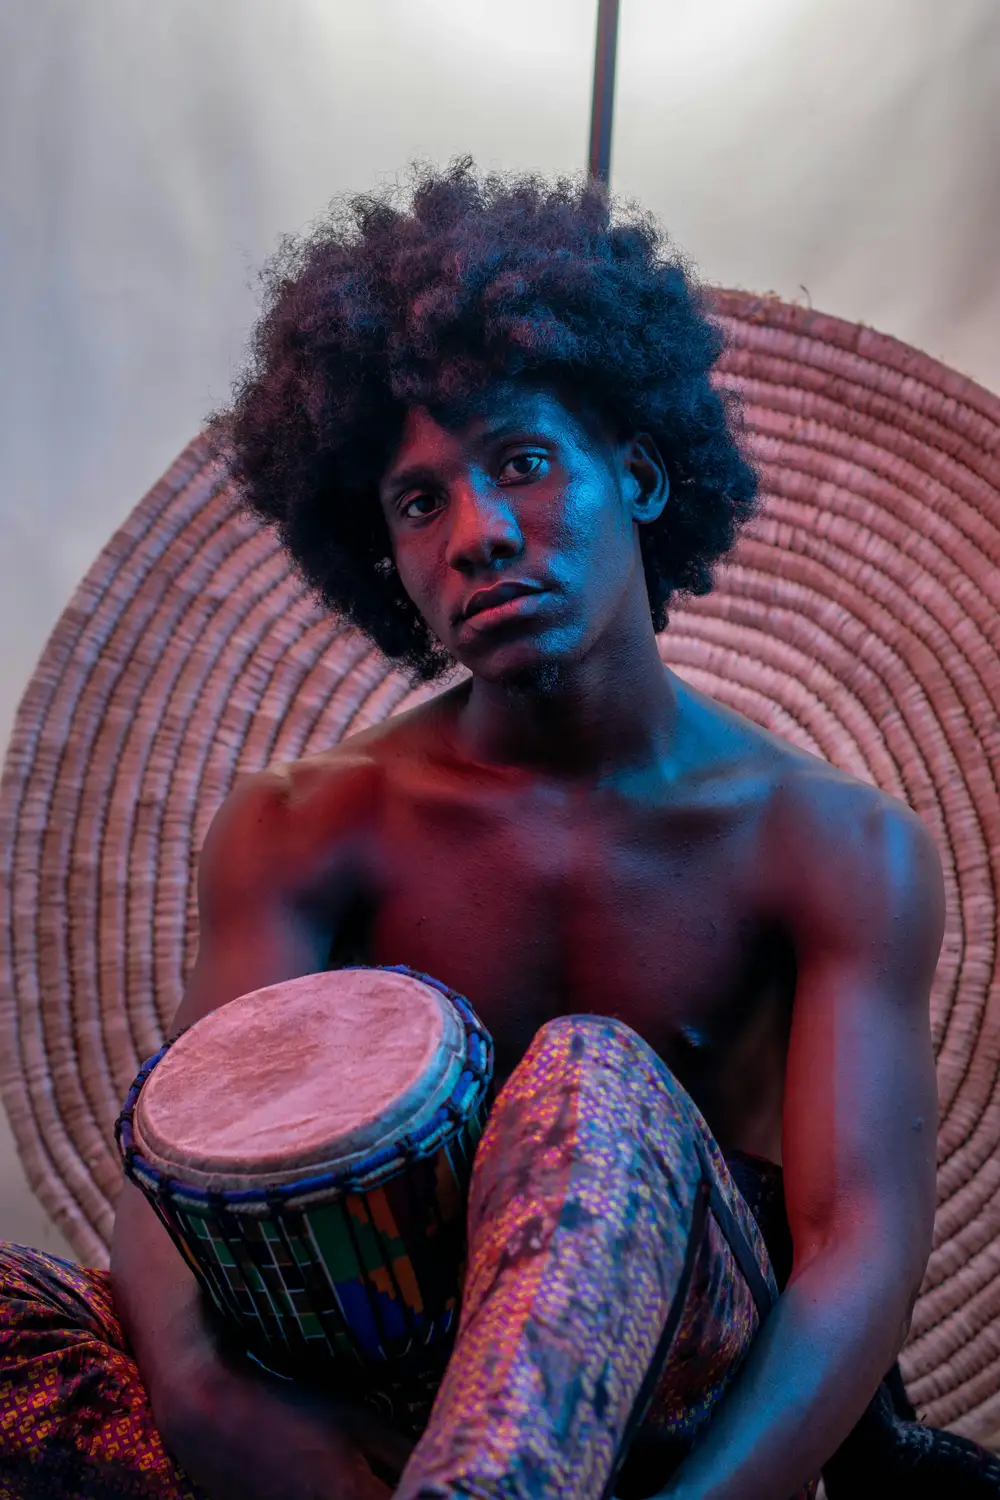 model on afro hairstyle holds his drum with his laps